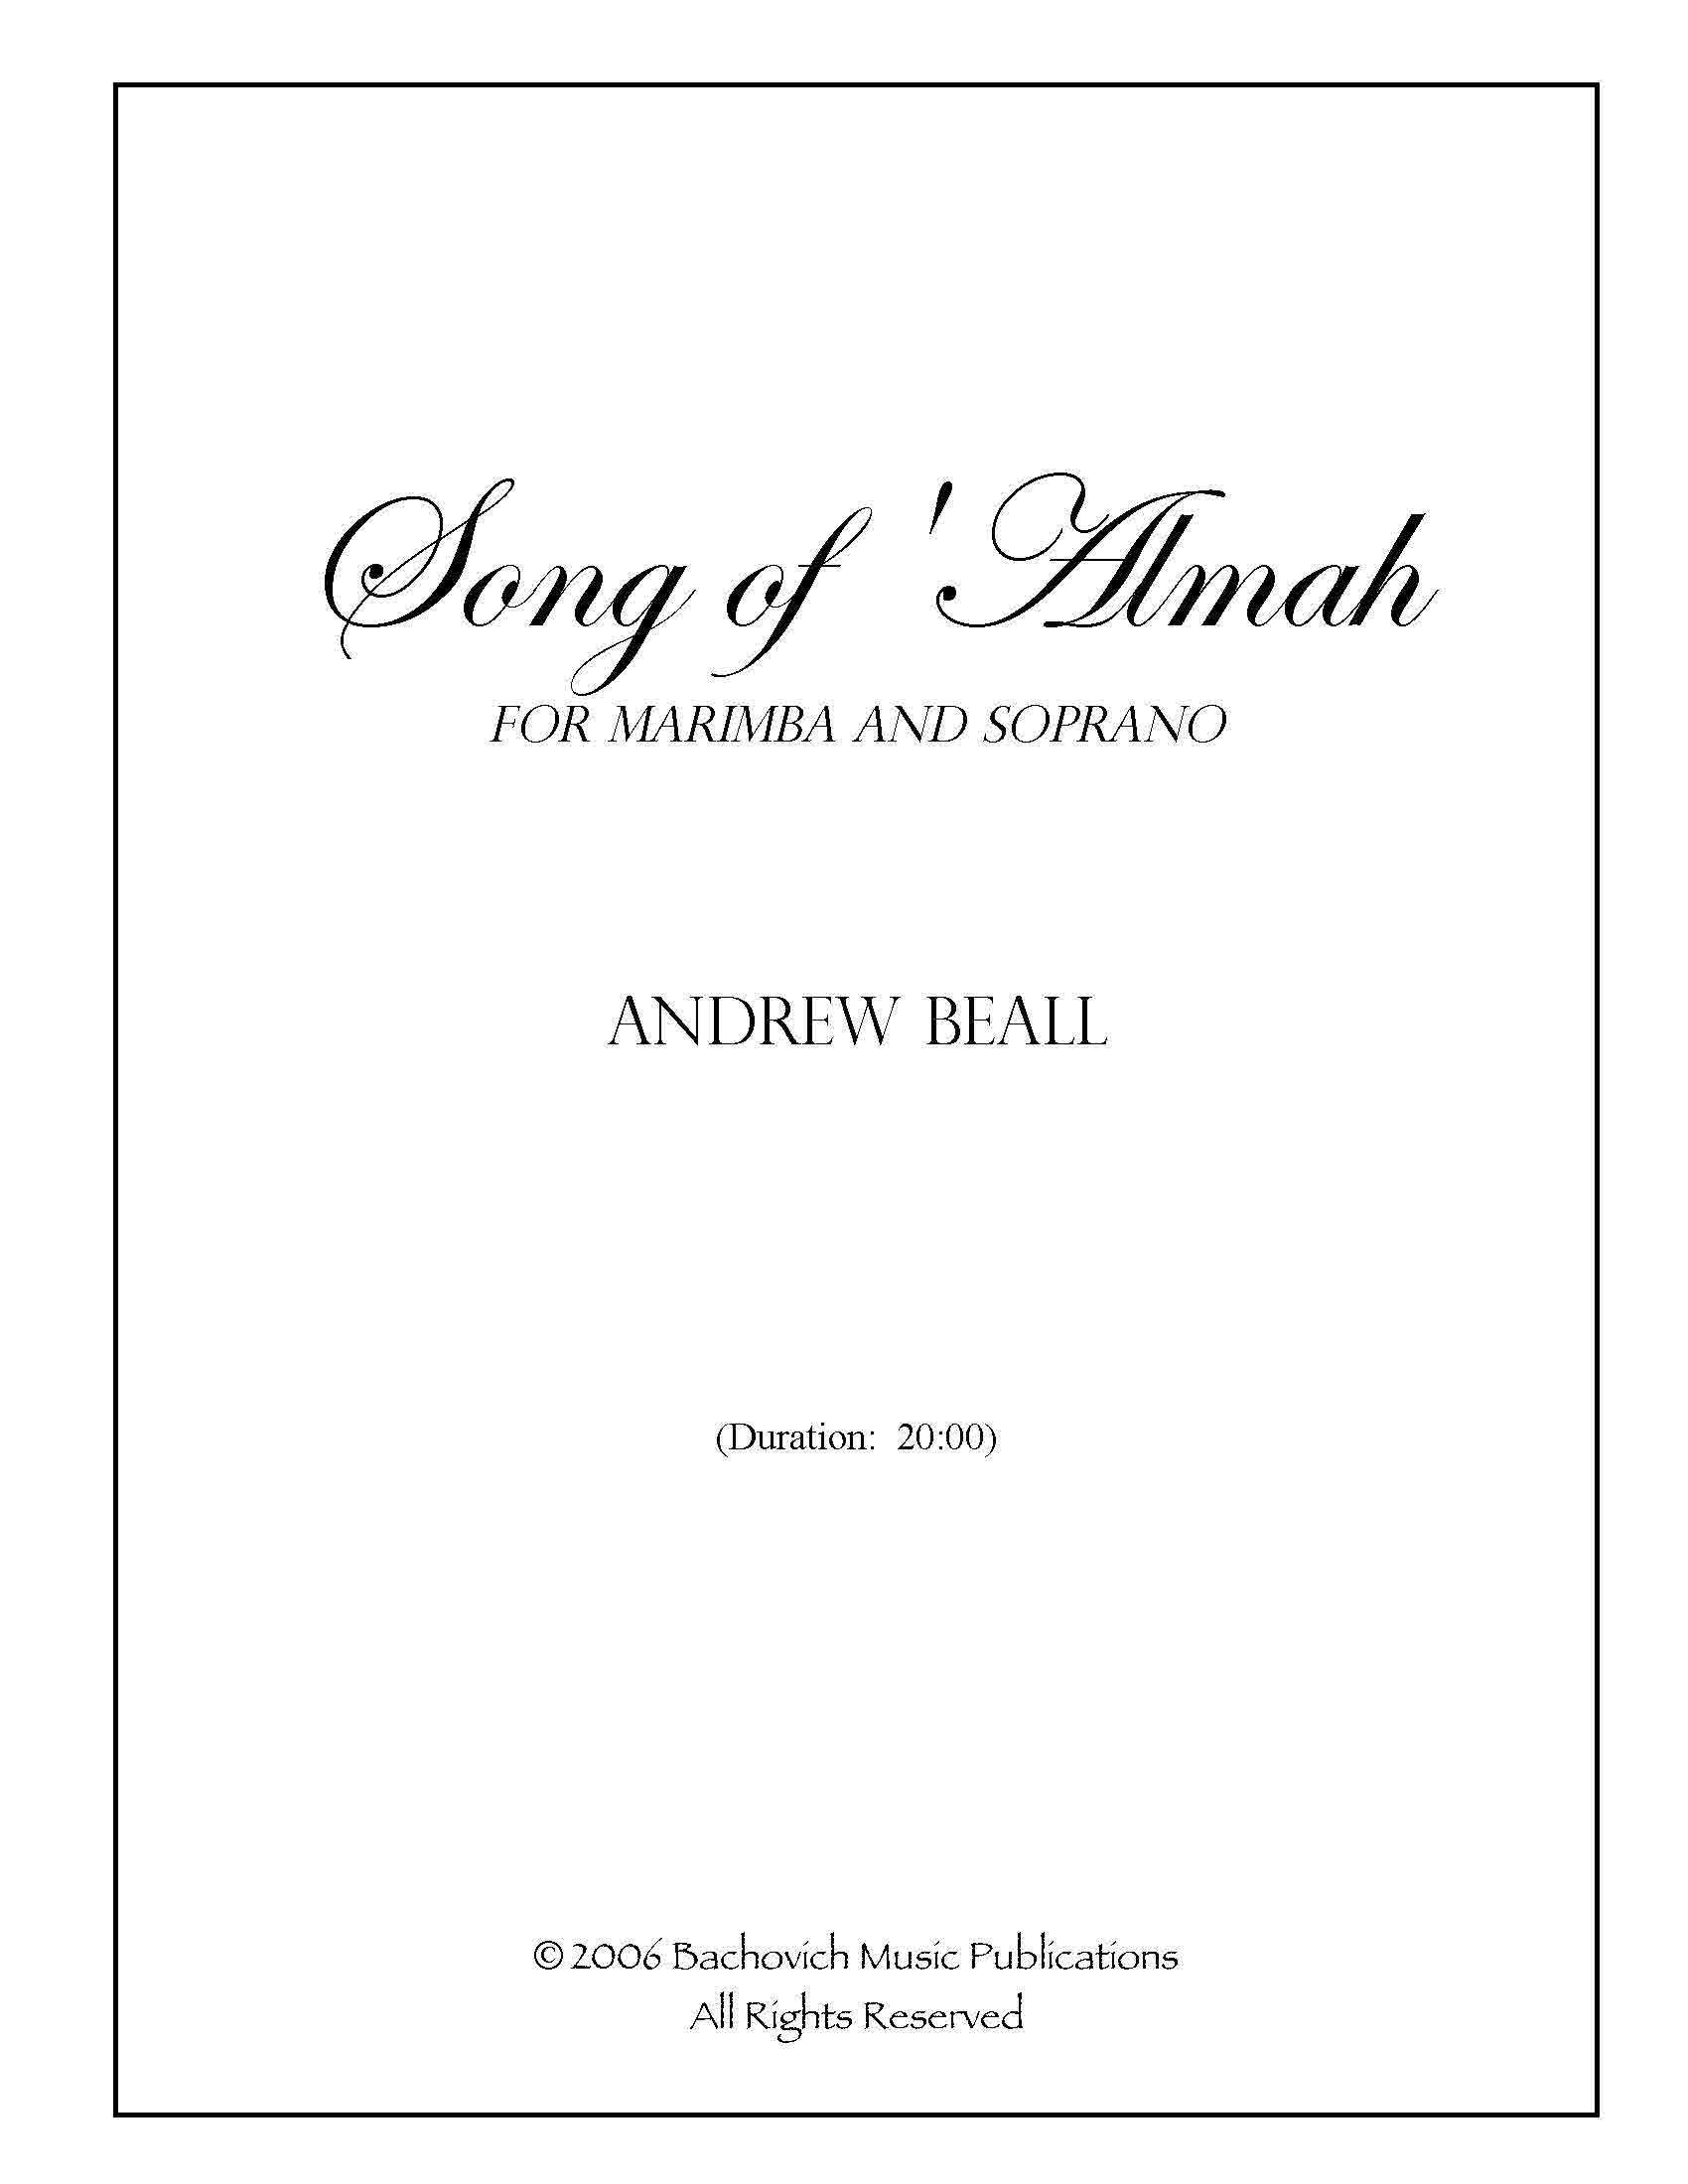 Song of Almah for marimba and soprano by Andrew Beall